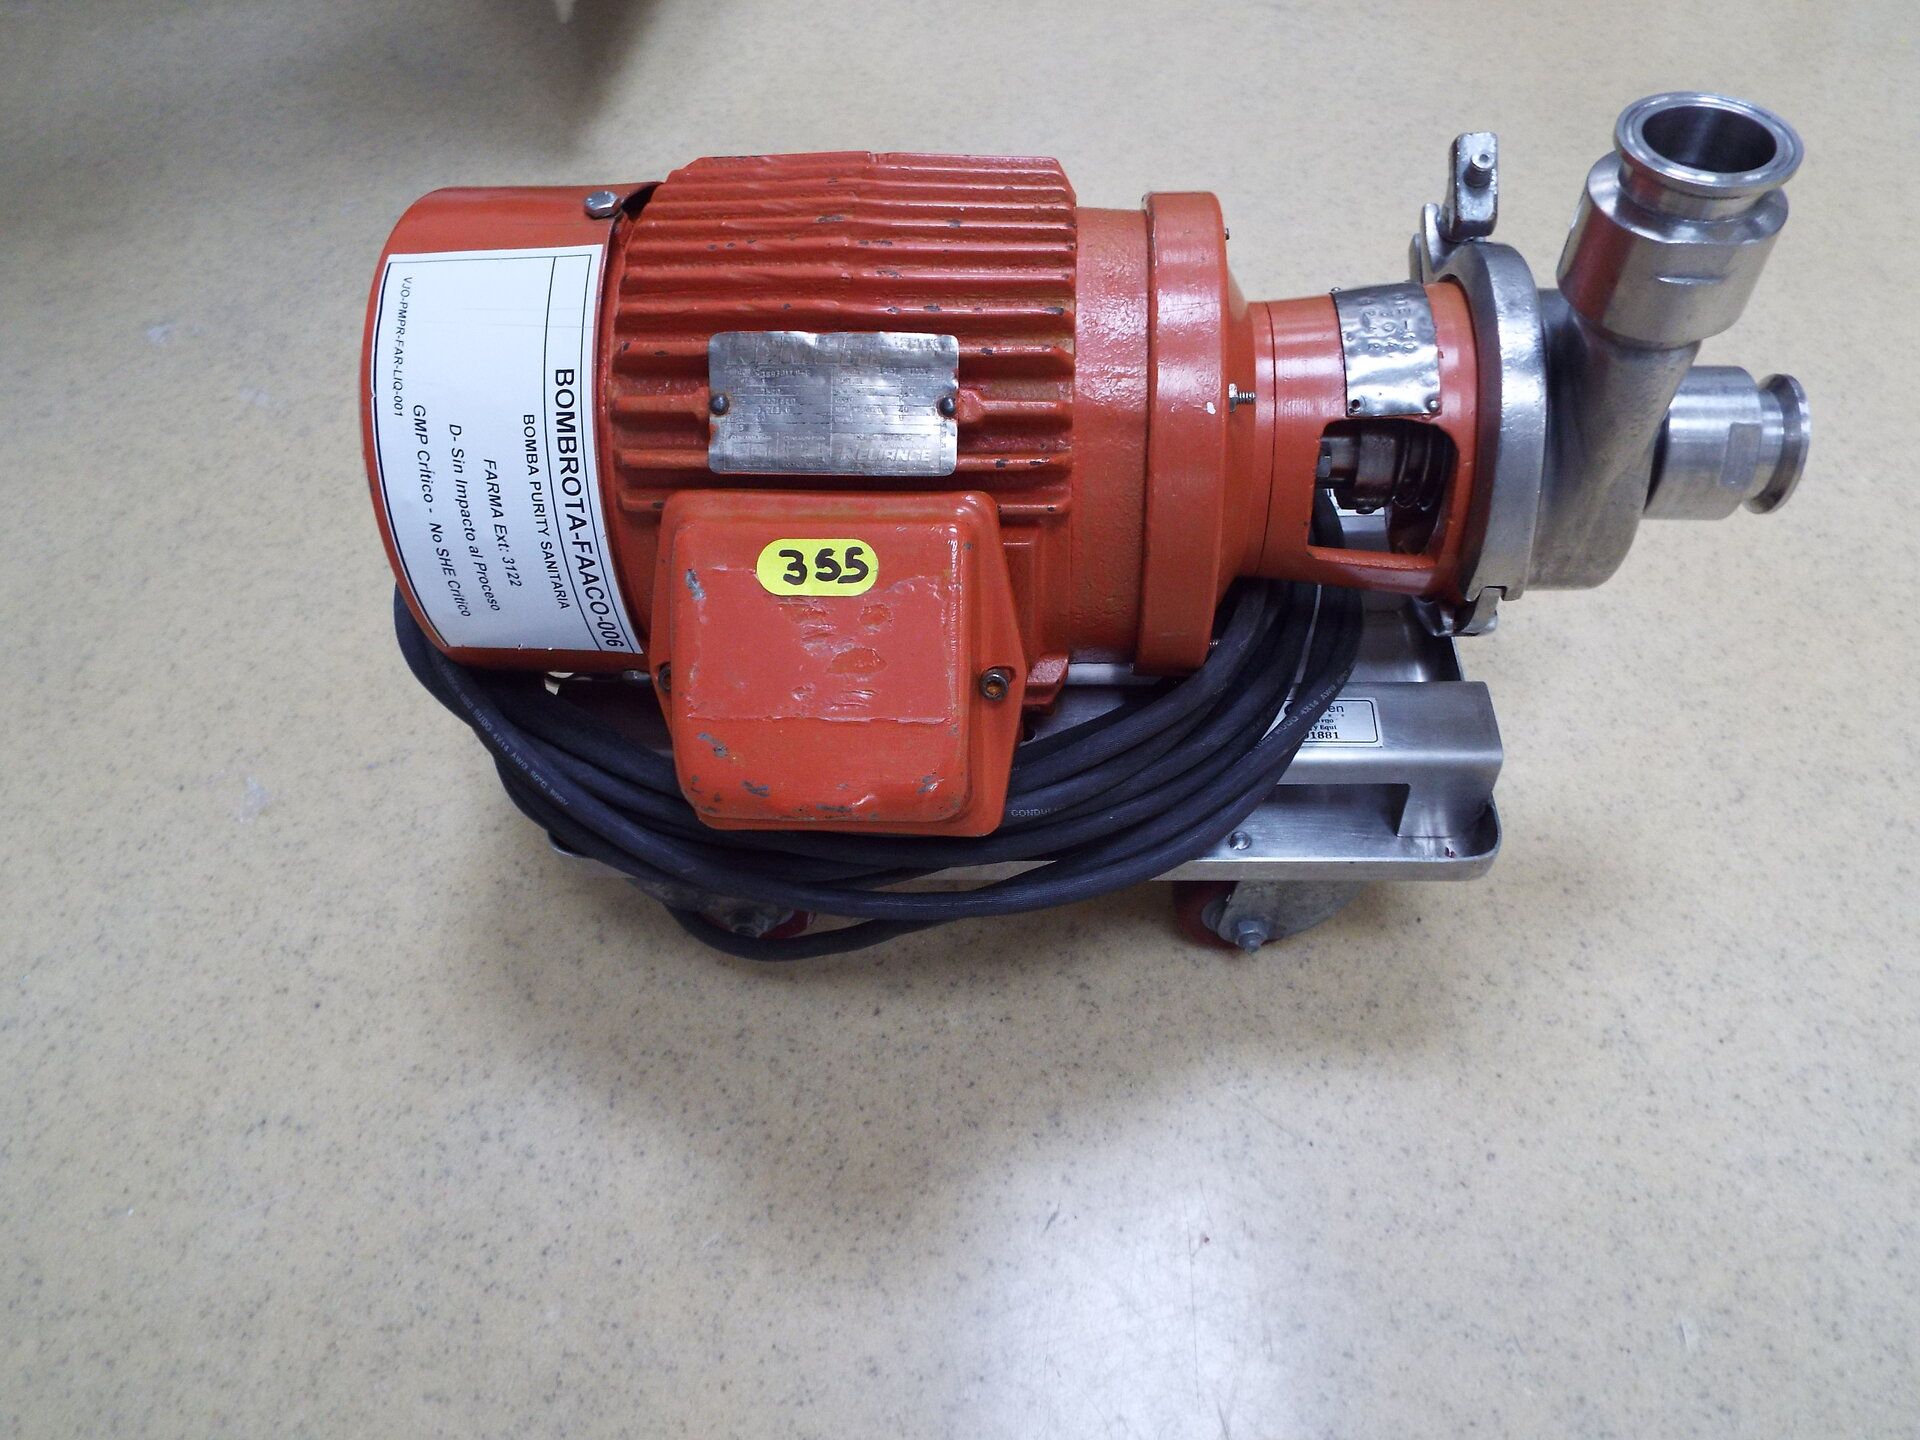 1 HP stainless steel centrifgual pump with 4" diameter impeller stainless steel base on casters